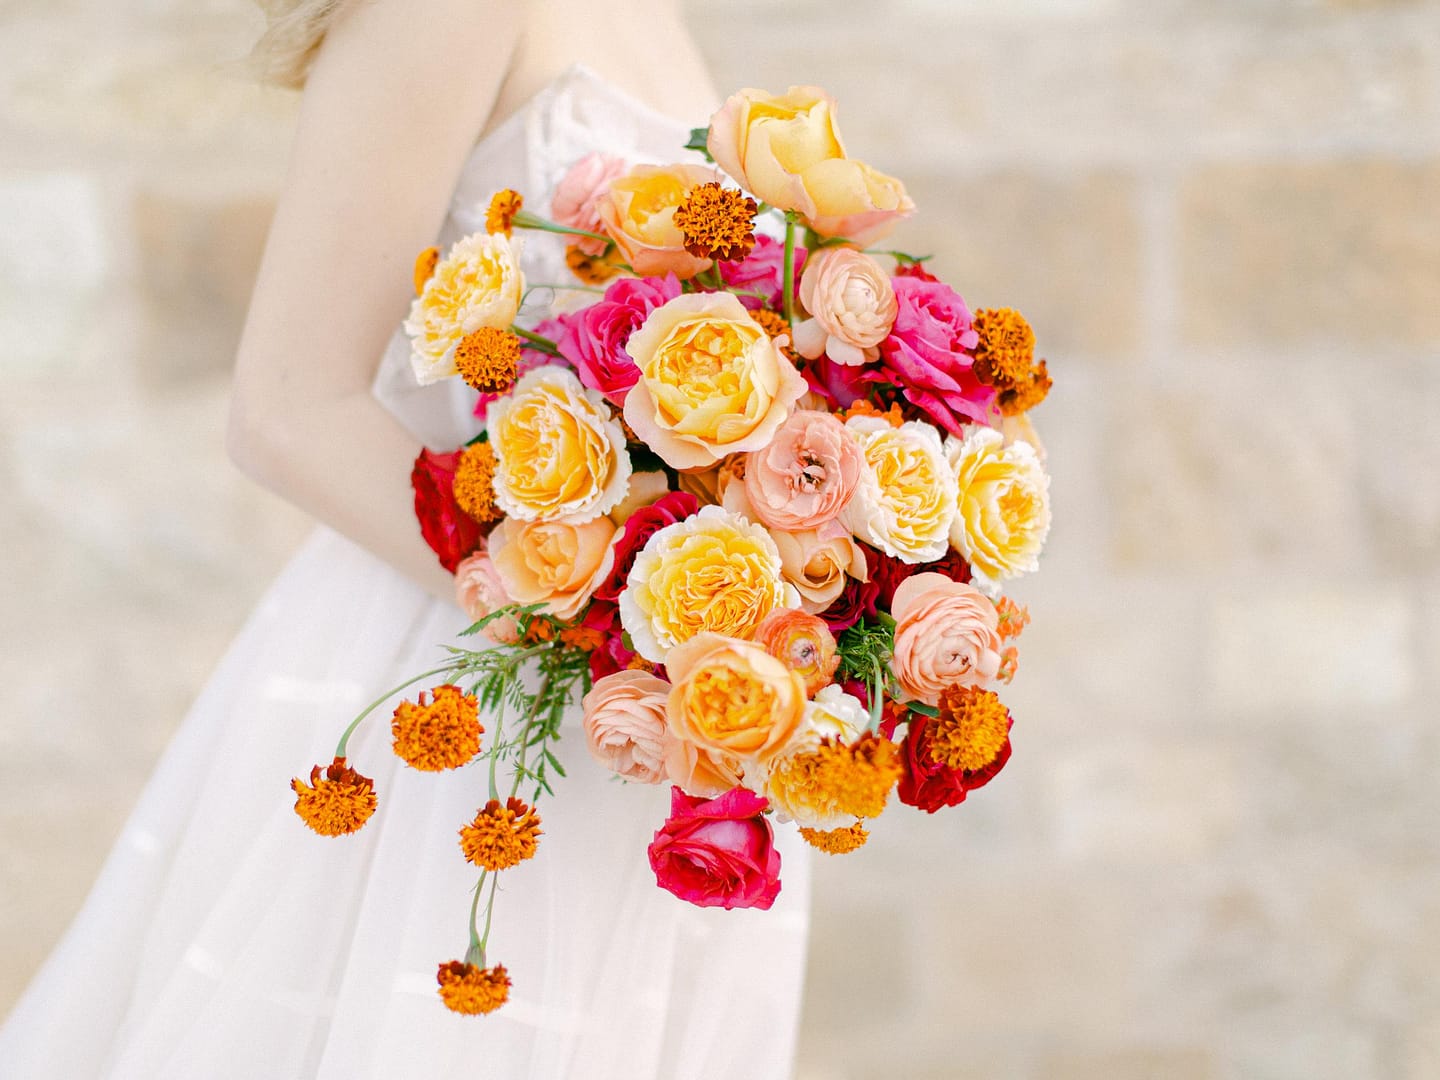 Bridal bouquet with bright wedding flowers